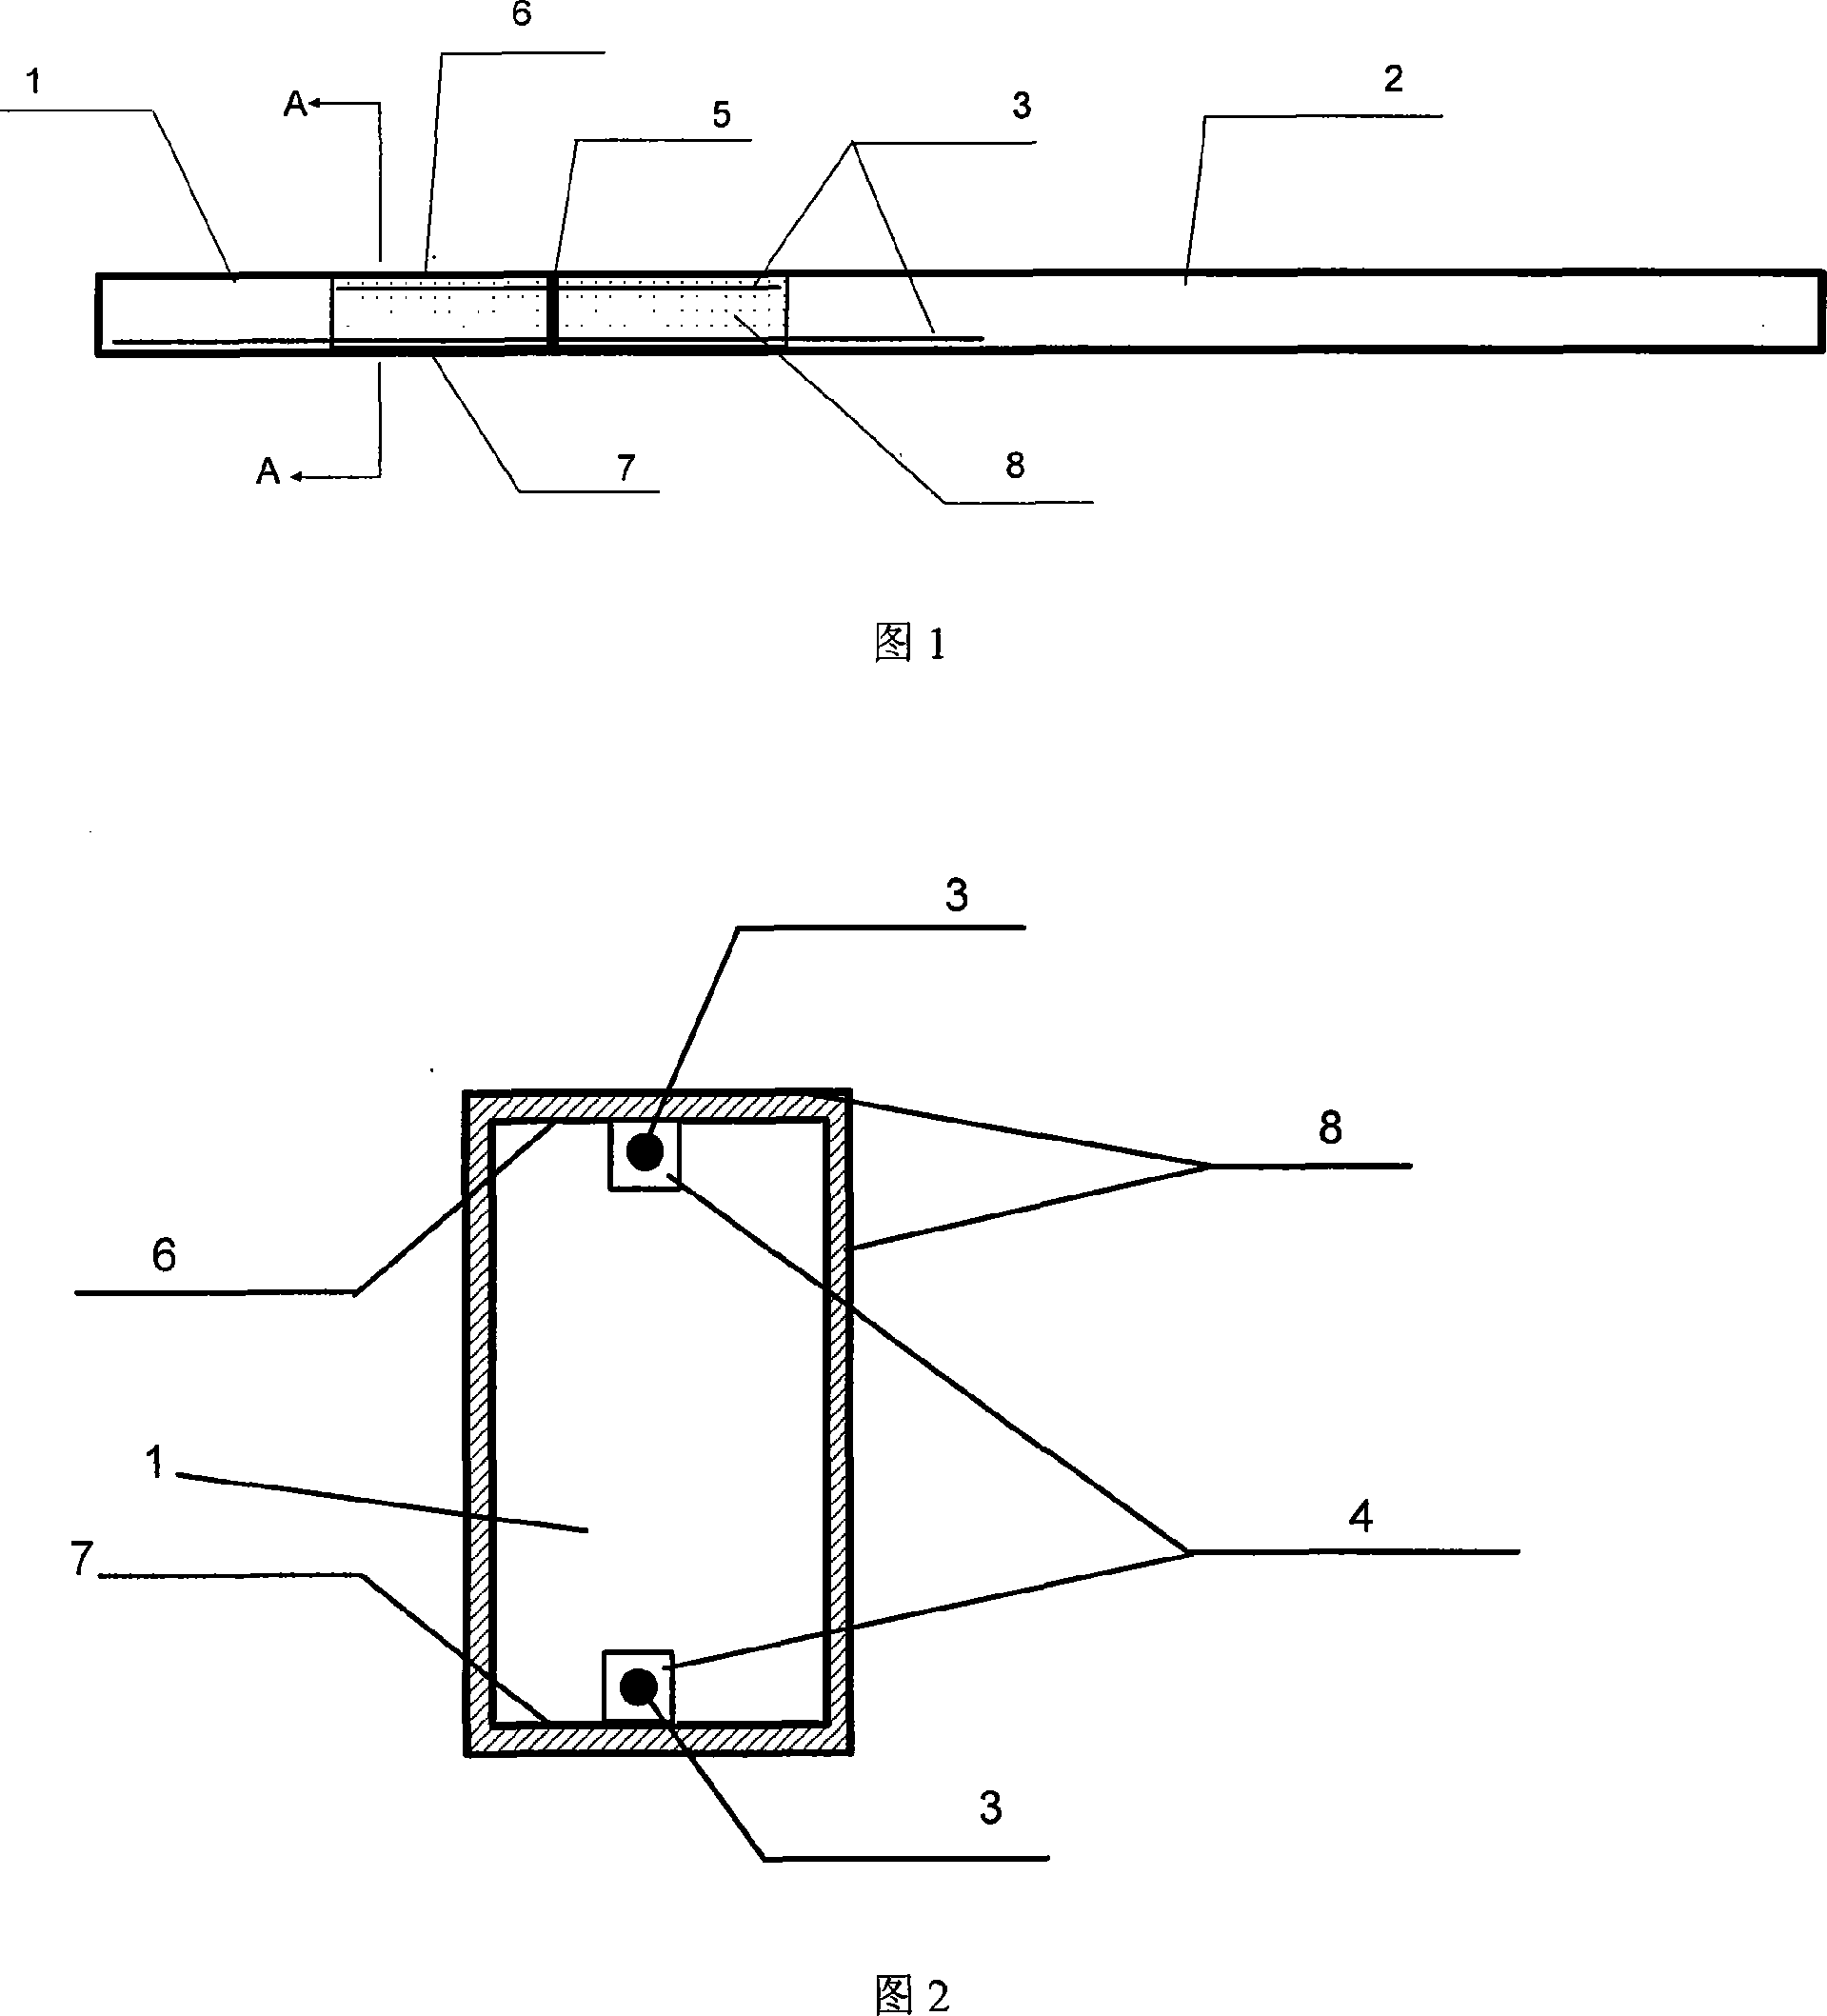 Method for repairing and reinforcing wood beam by carbon fibre bar